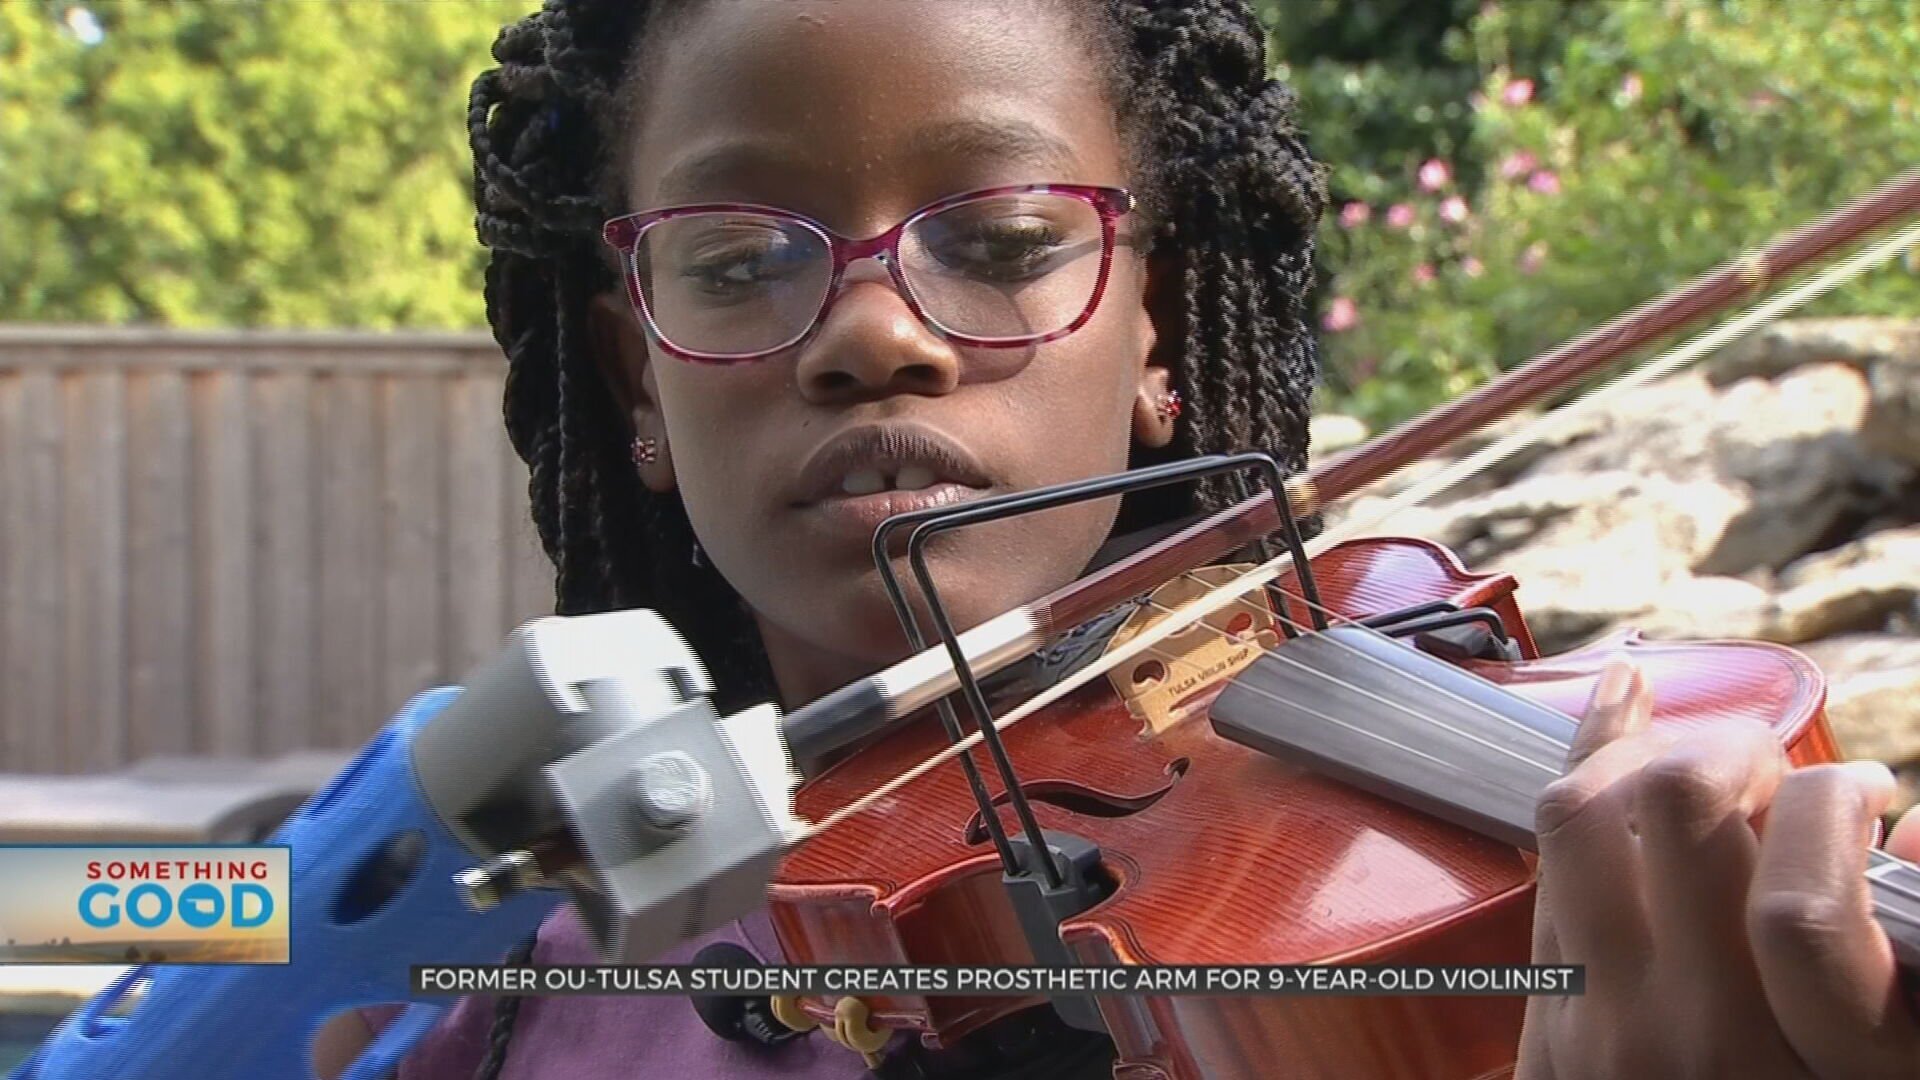 9-Year-Old Violinist Defies Odds With Help Of Former OU-Tulsa Student 